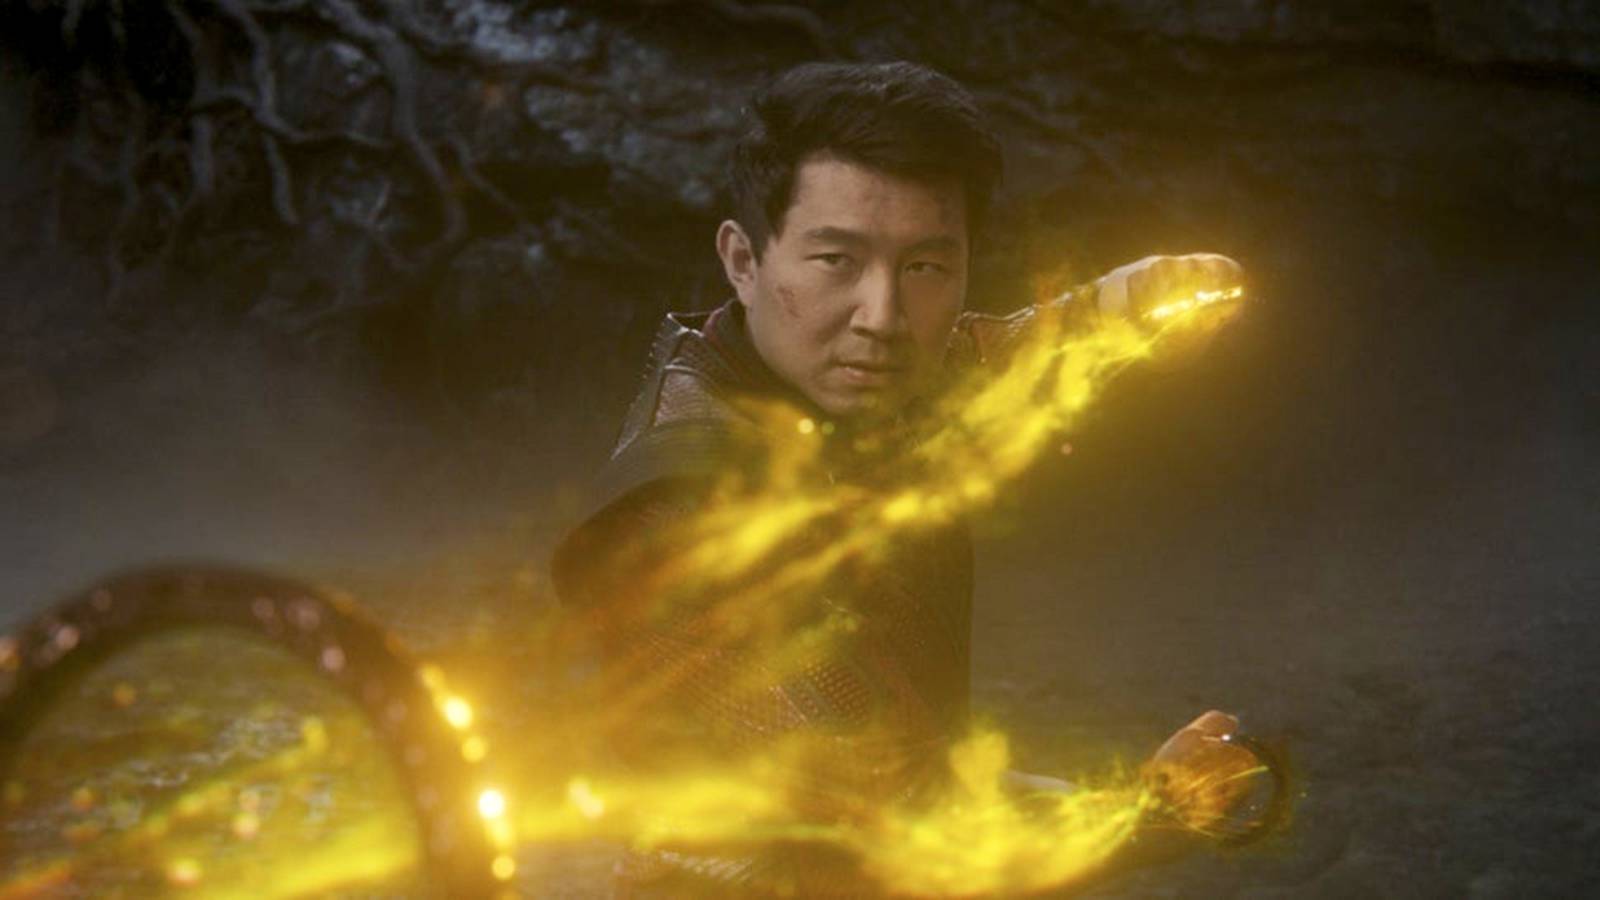 Your Weekly Roundup of New Movies “ShangChi” Offers a